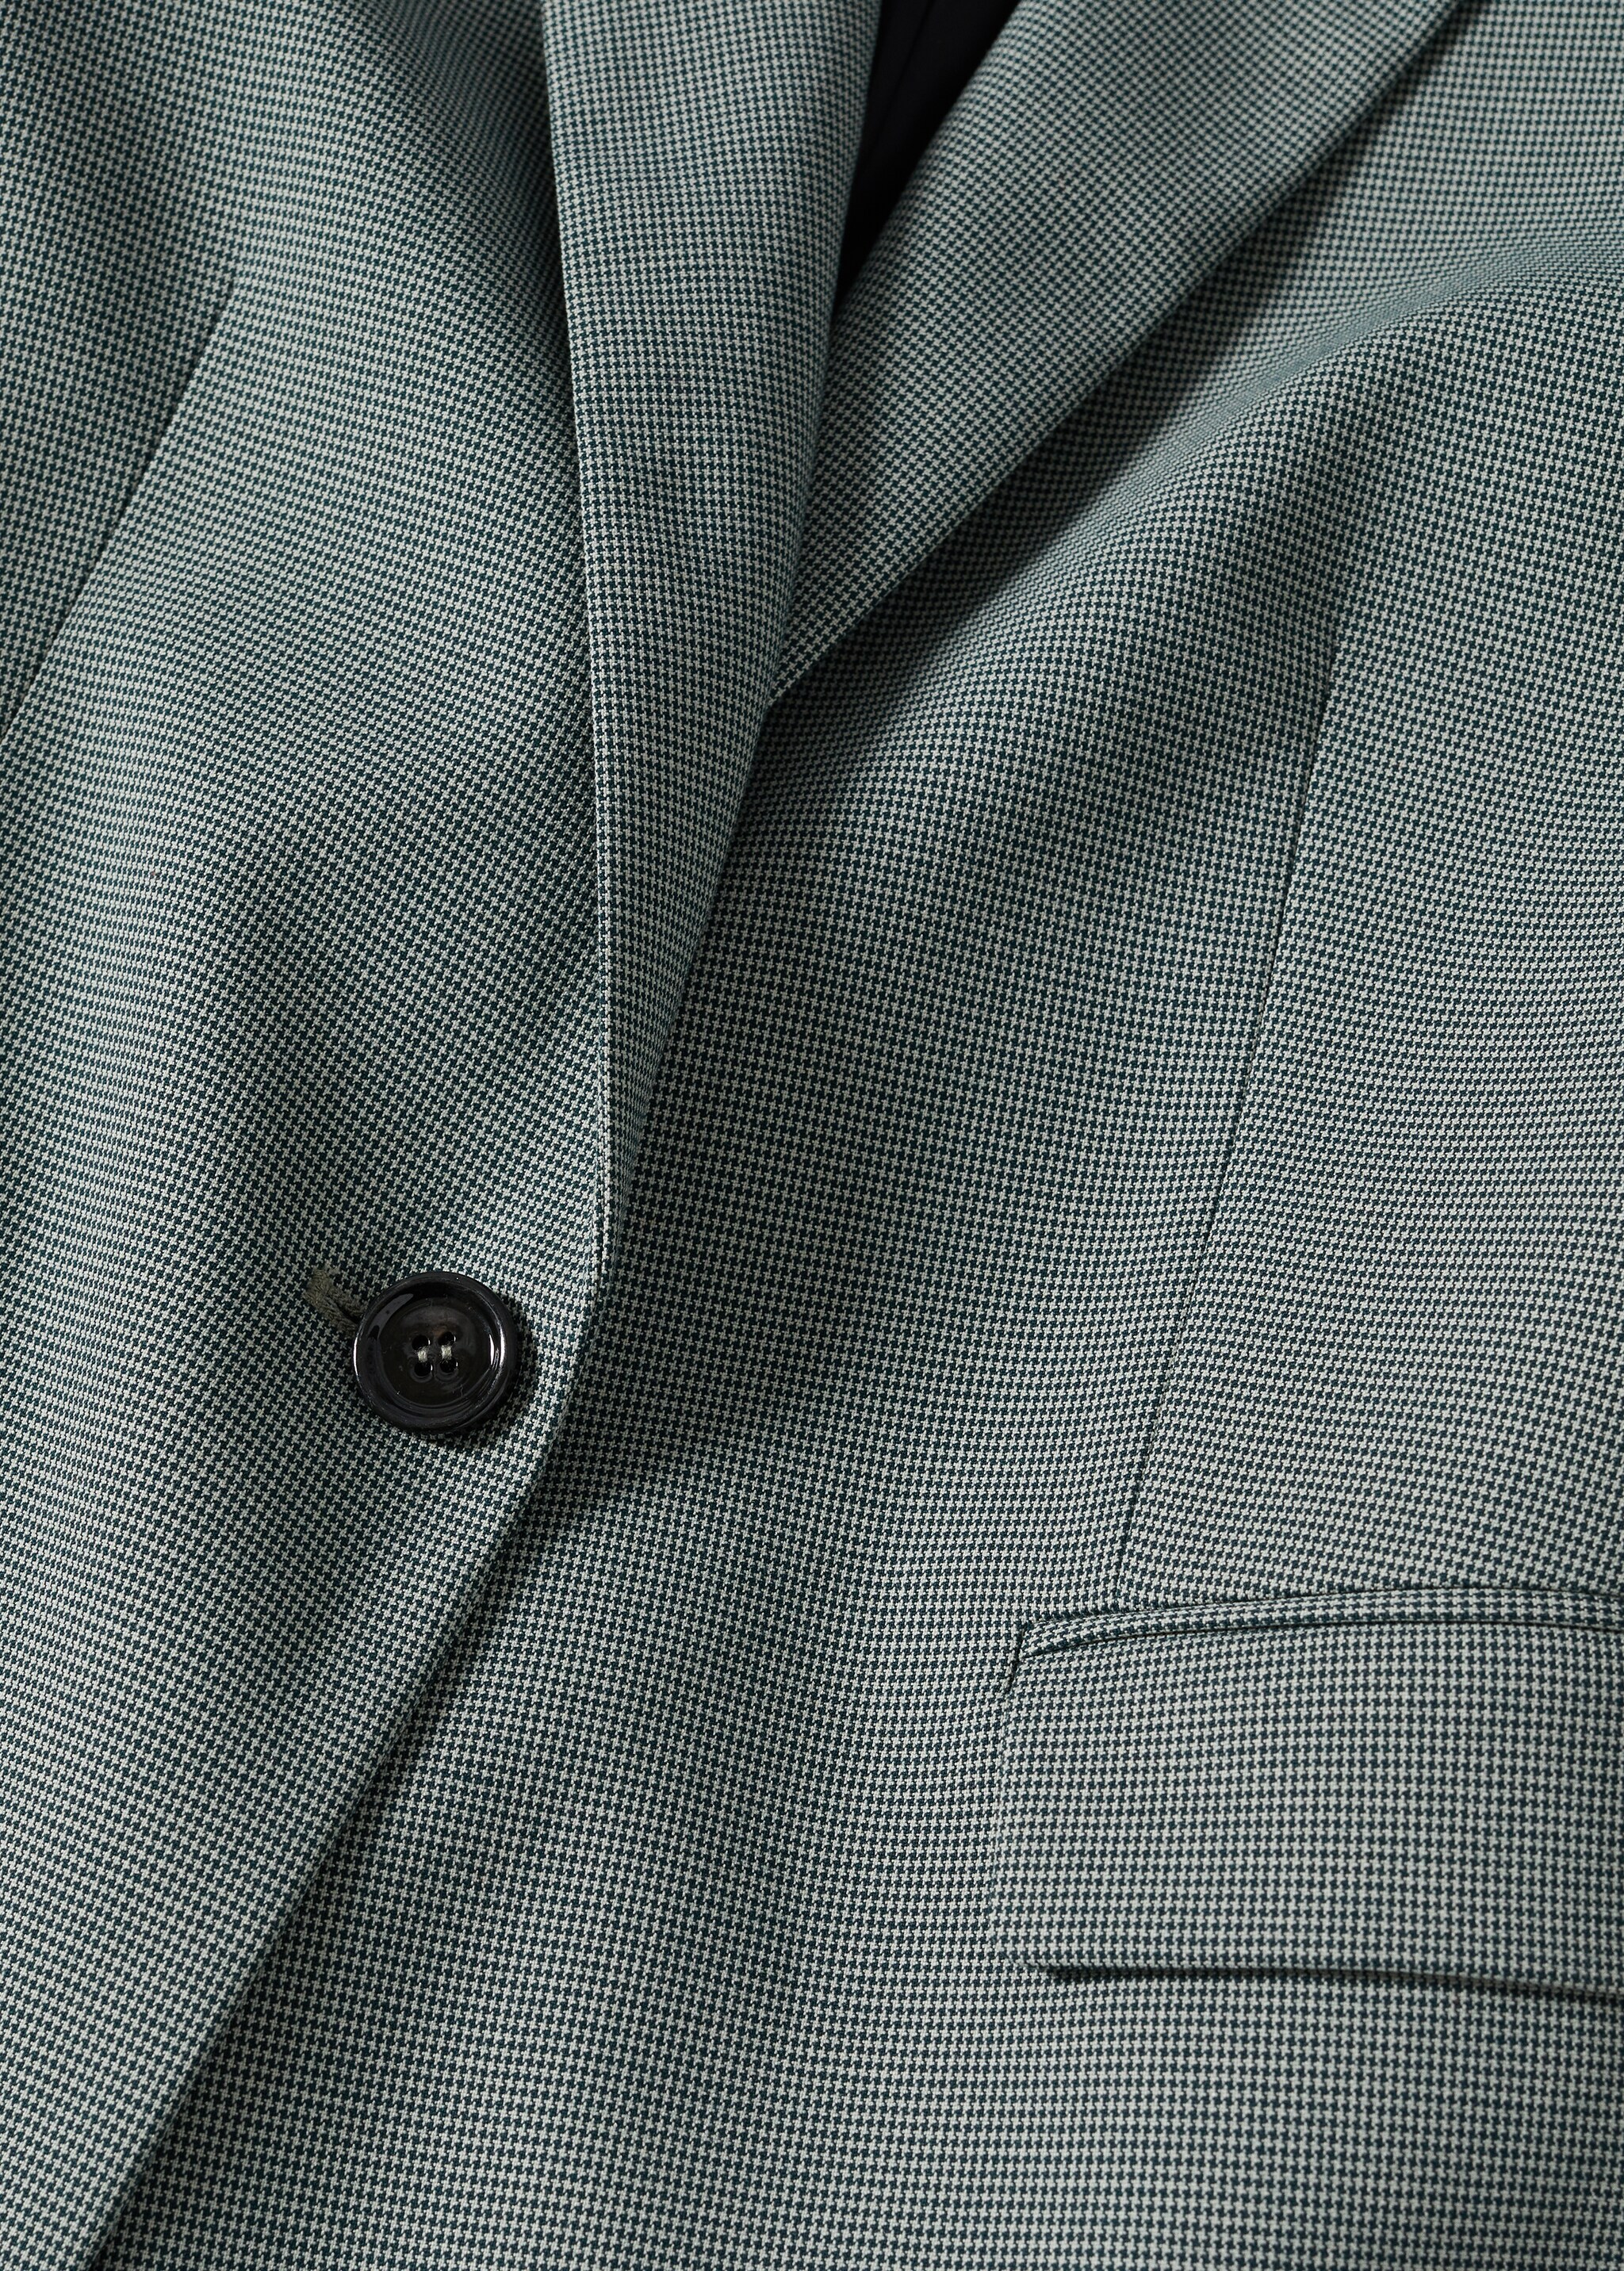 Patterned suit blazer - Details of the article 8